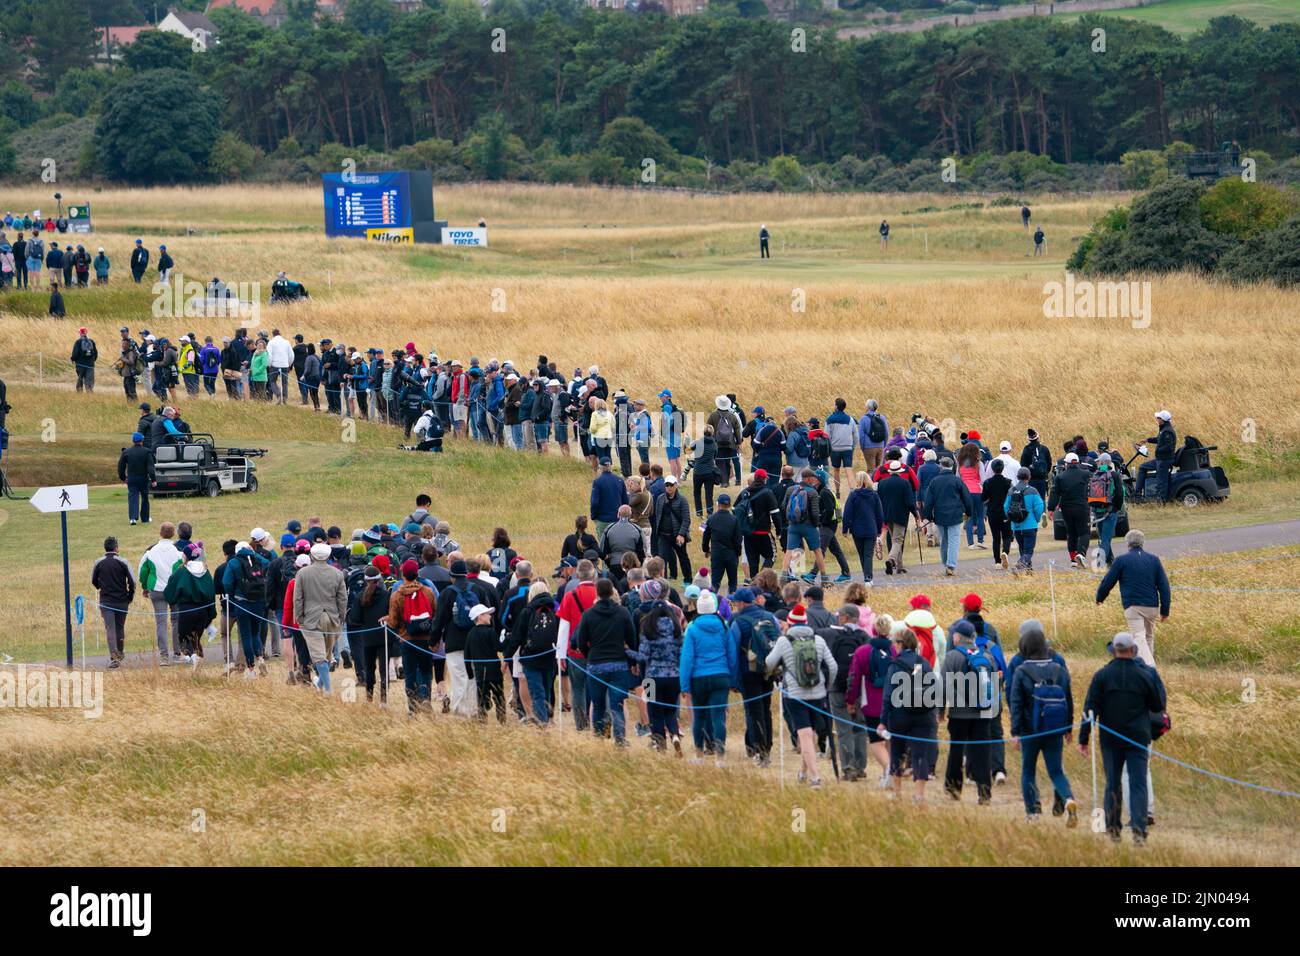 Gullane, Scotland, UK. 7th August 2022. Final  round of the AIG Women’s Open golf championship at Muirfield in Gullane, East Lothian. Pic;  Crowds of spectators make their way down the 14th fairway. Iain Masterton/Alamy Live News Stock Photo